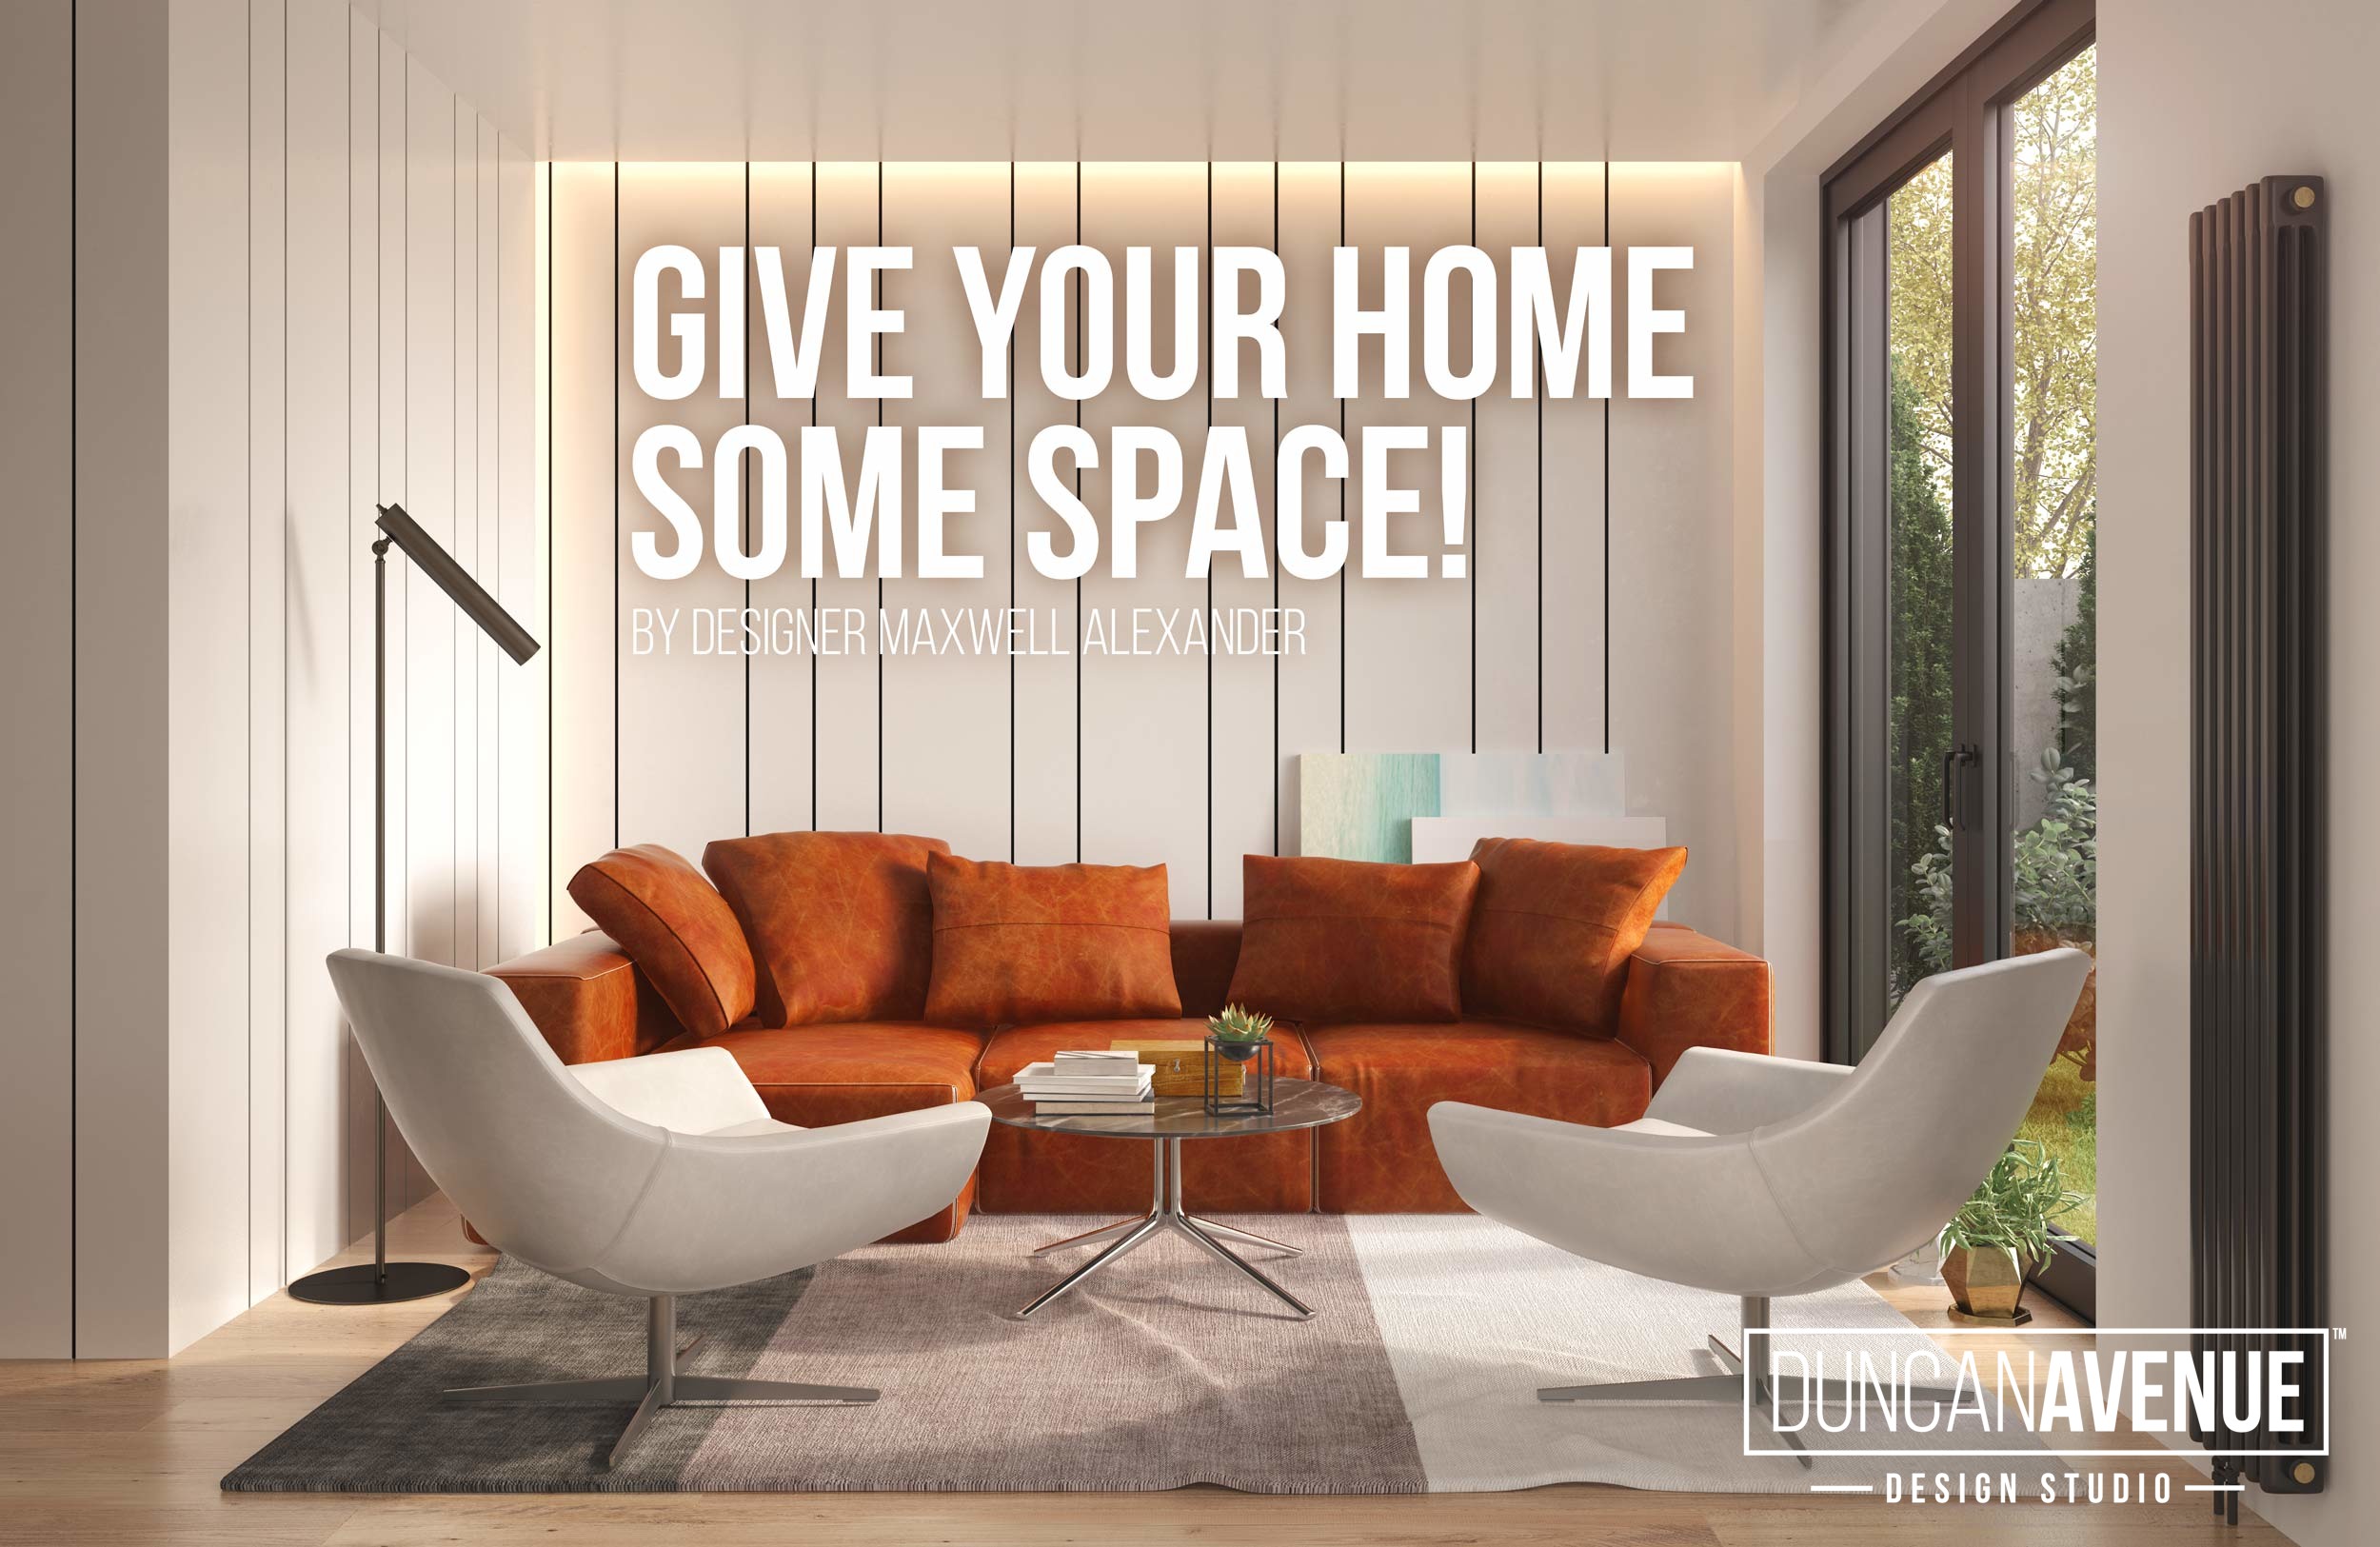 Give Your Home Some Space by Interior Designer Maxwell L. Alexander